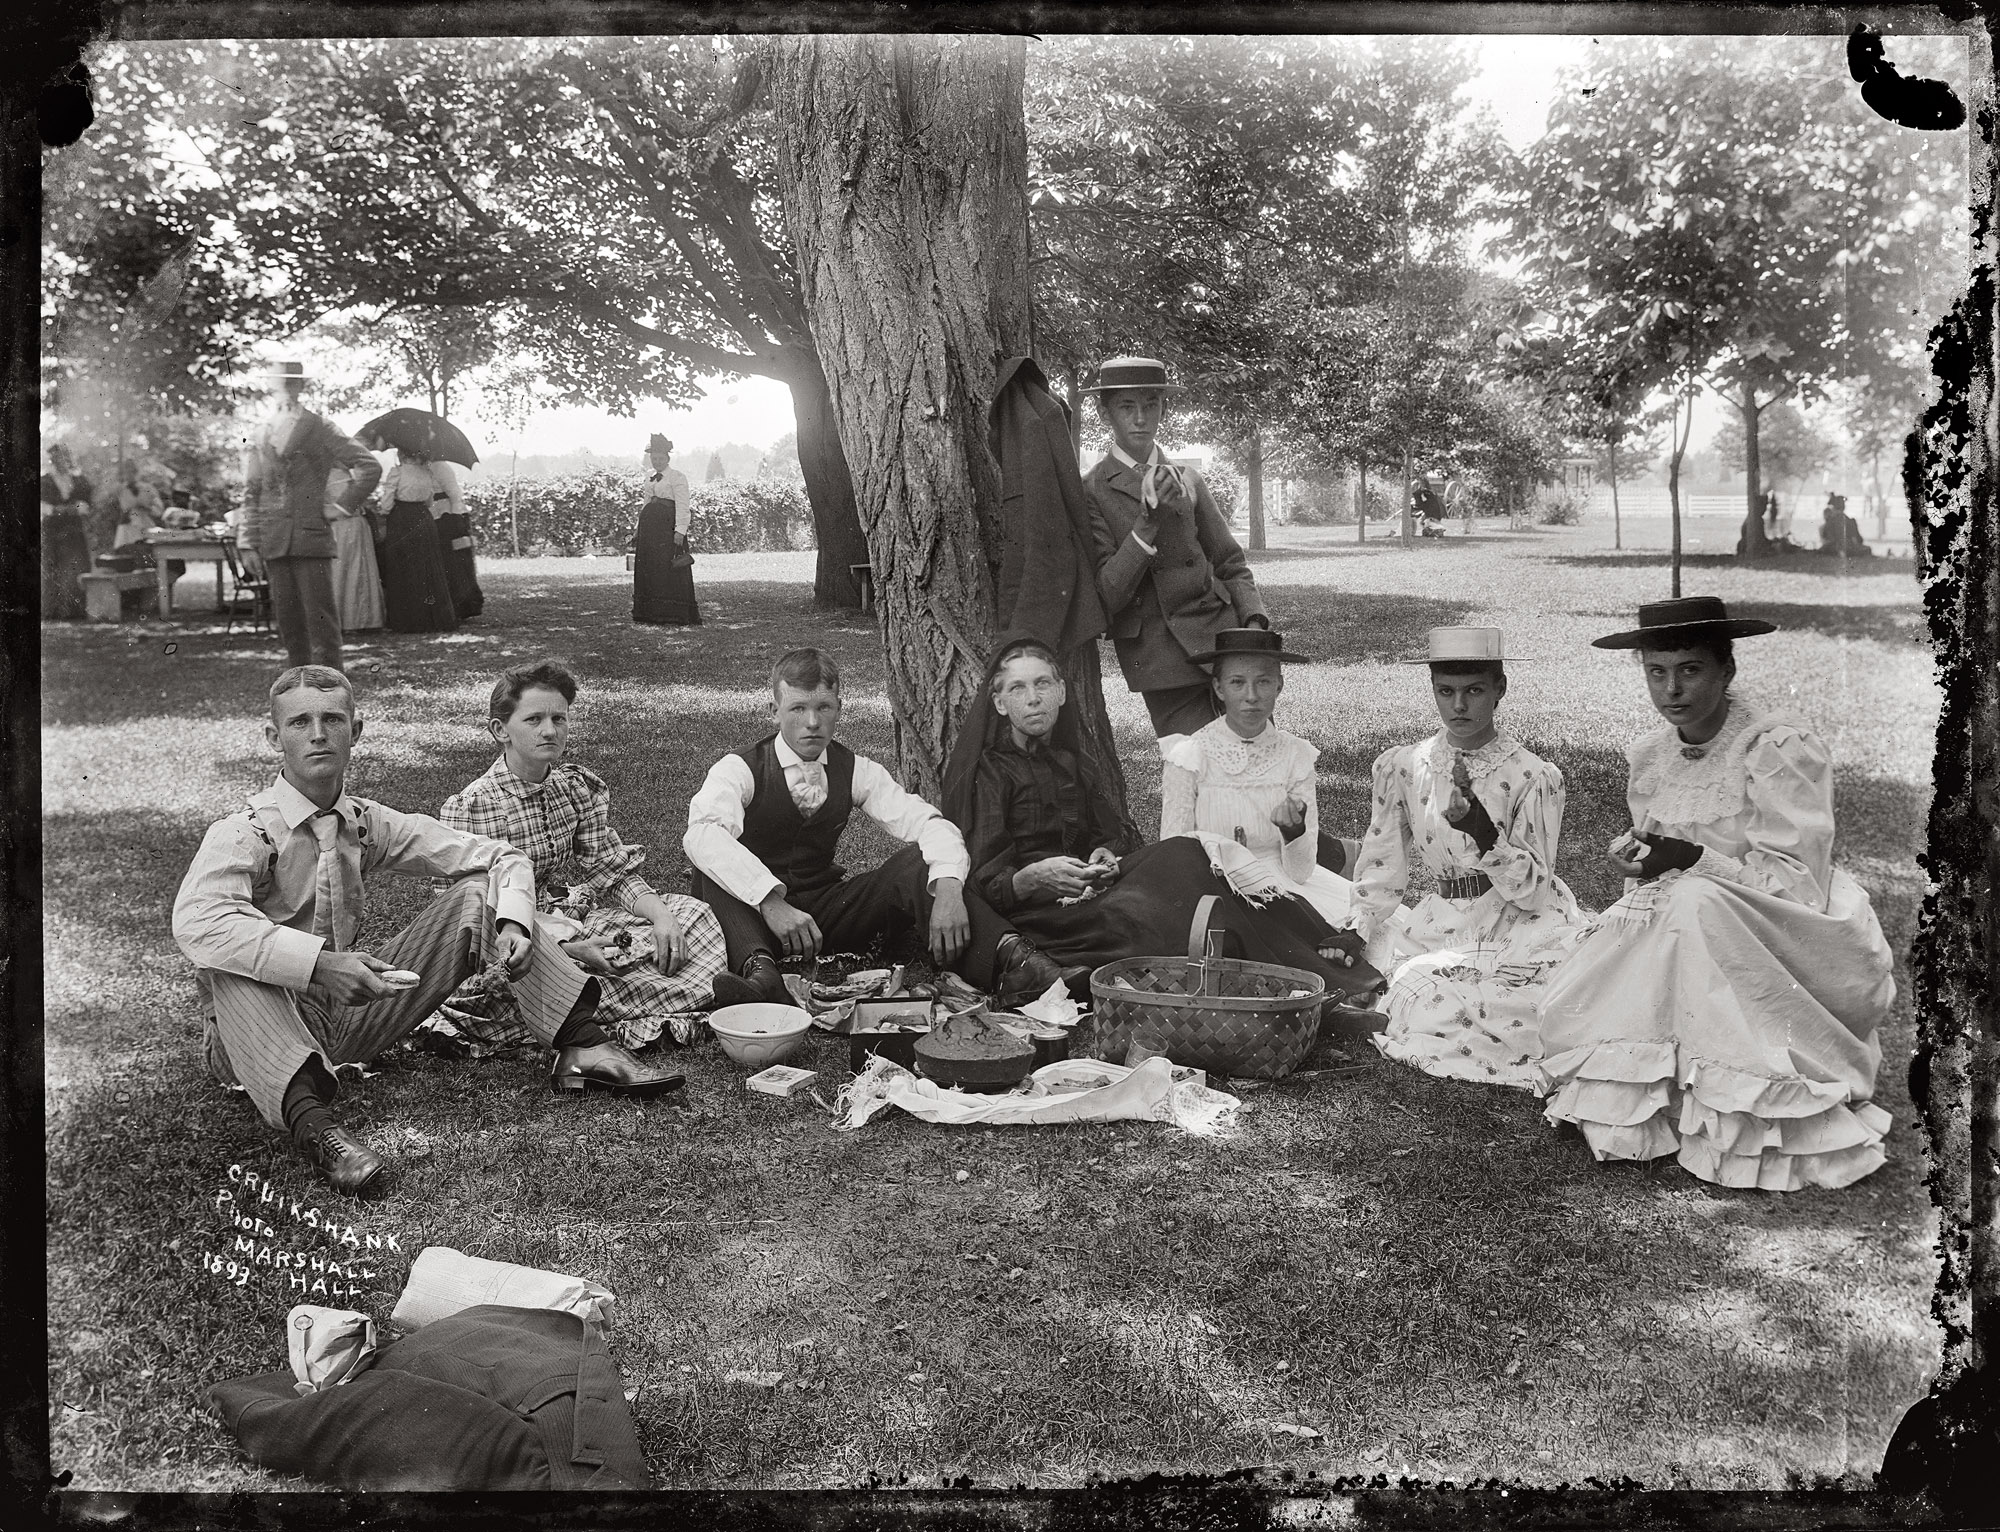 Picnic at Camp McKibbin, Marshall Hall, Maryland, 1893. With members of the 2nd, 3rd and 6th battalions of the District National Guard. View full size. Photograph by William Cruikshank.